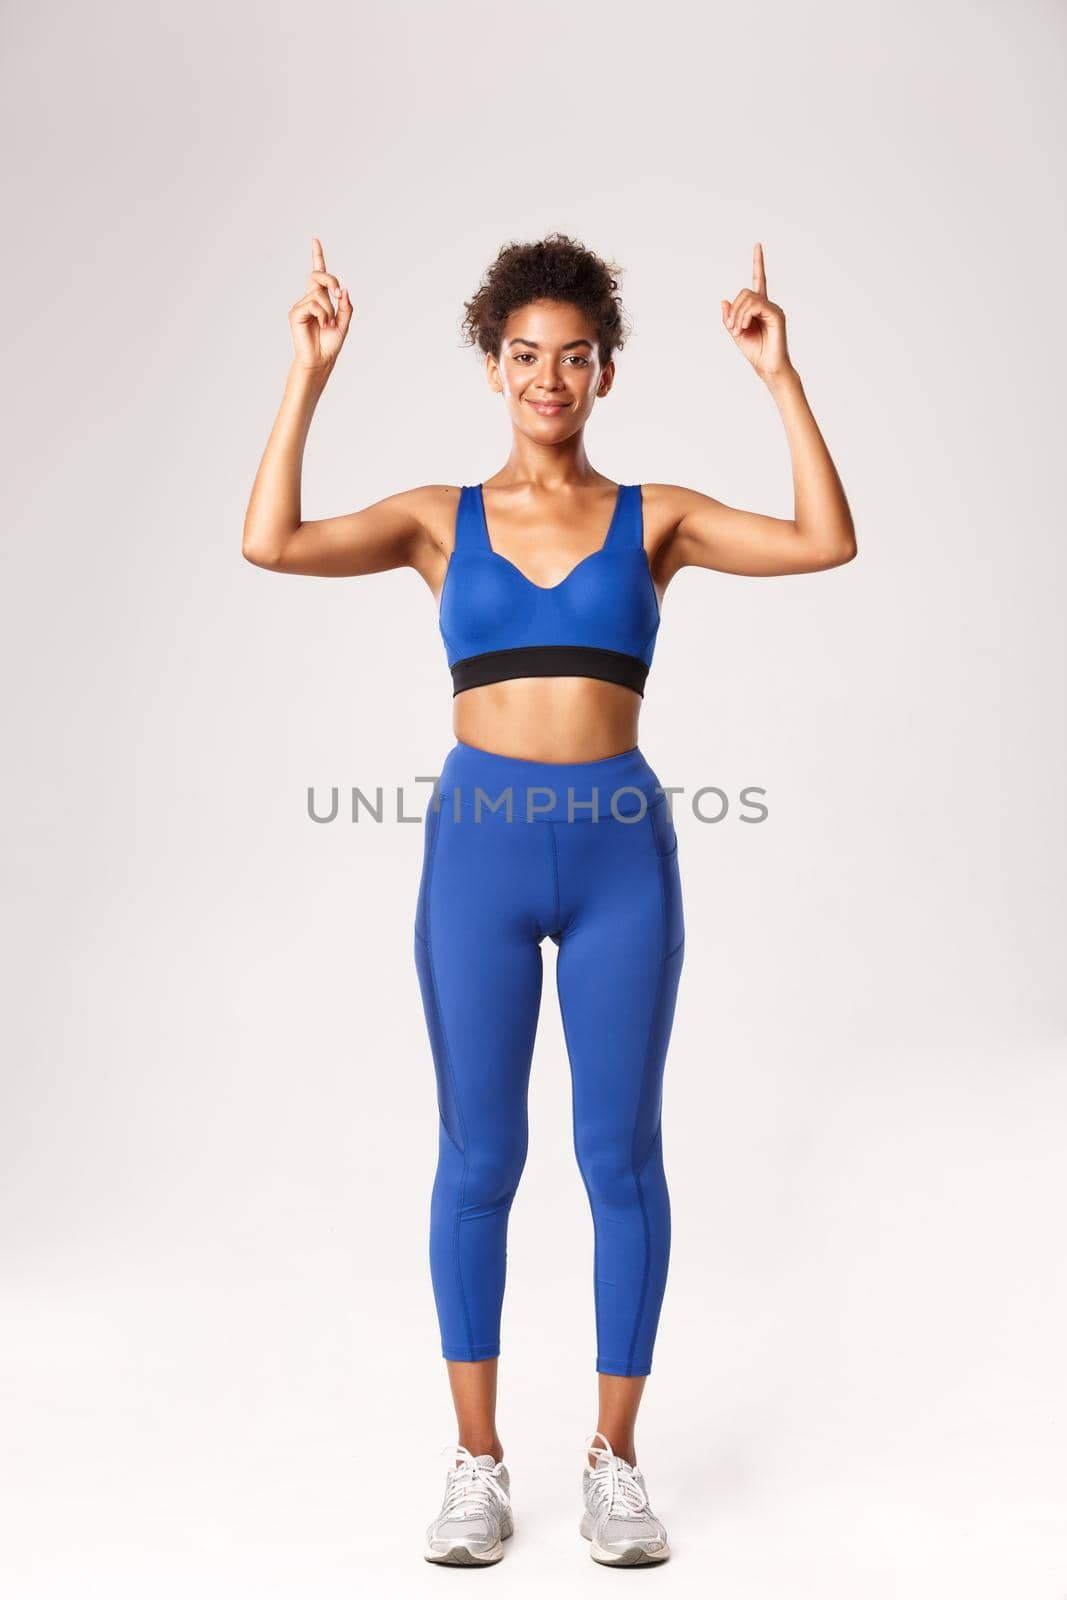 Full length of smiling attractive Black sportswoman in blue sports clothing, looking pleased at camera and pointing fingers up, showing logo or advertisement about workout, white background.